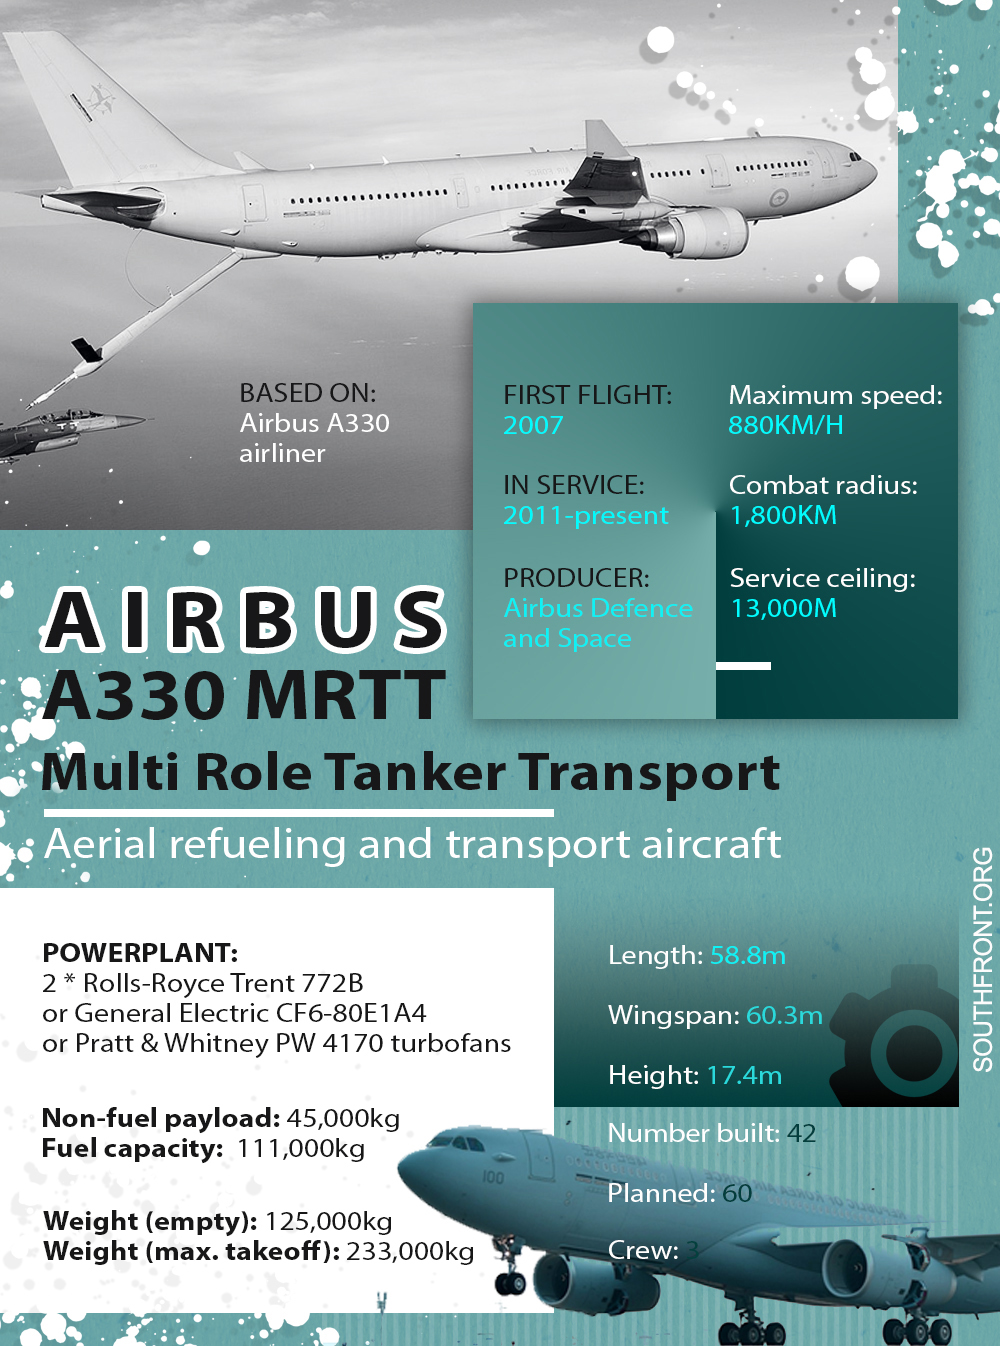 Airbus A330 MRTT, Multi Role Tanker Transport aerial refuelling tanker aircraft based on the civilian Airbus A330.